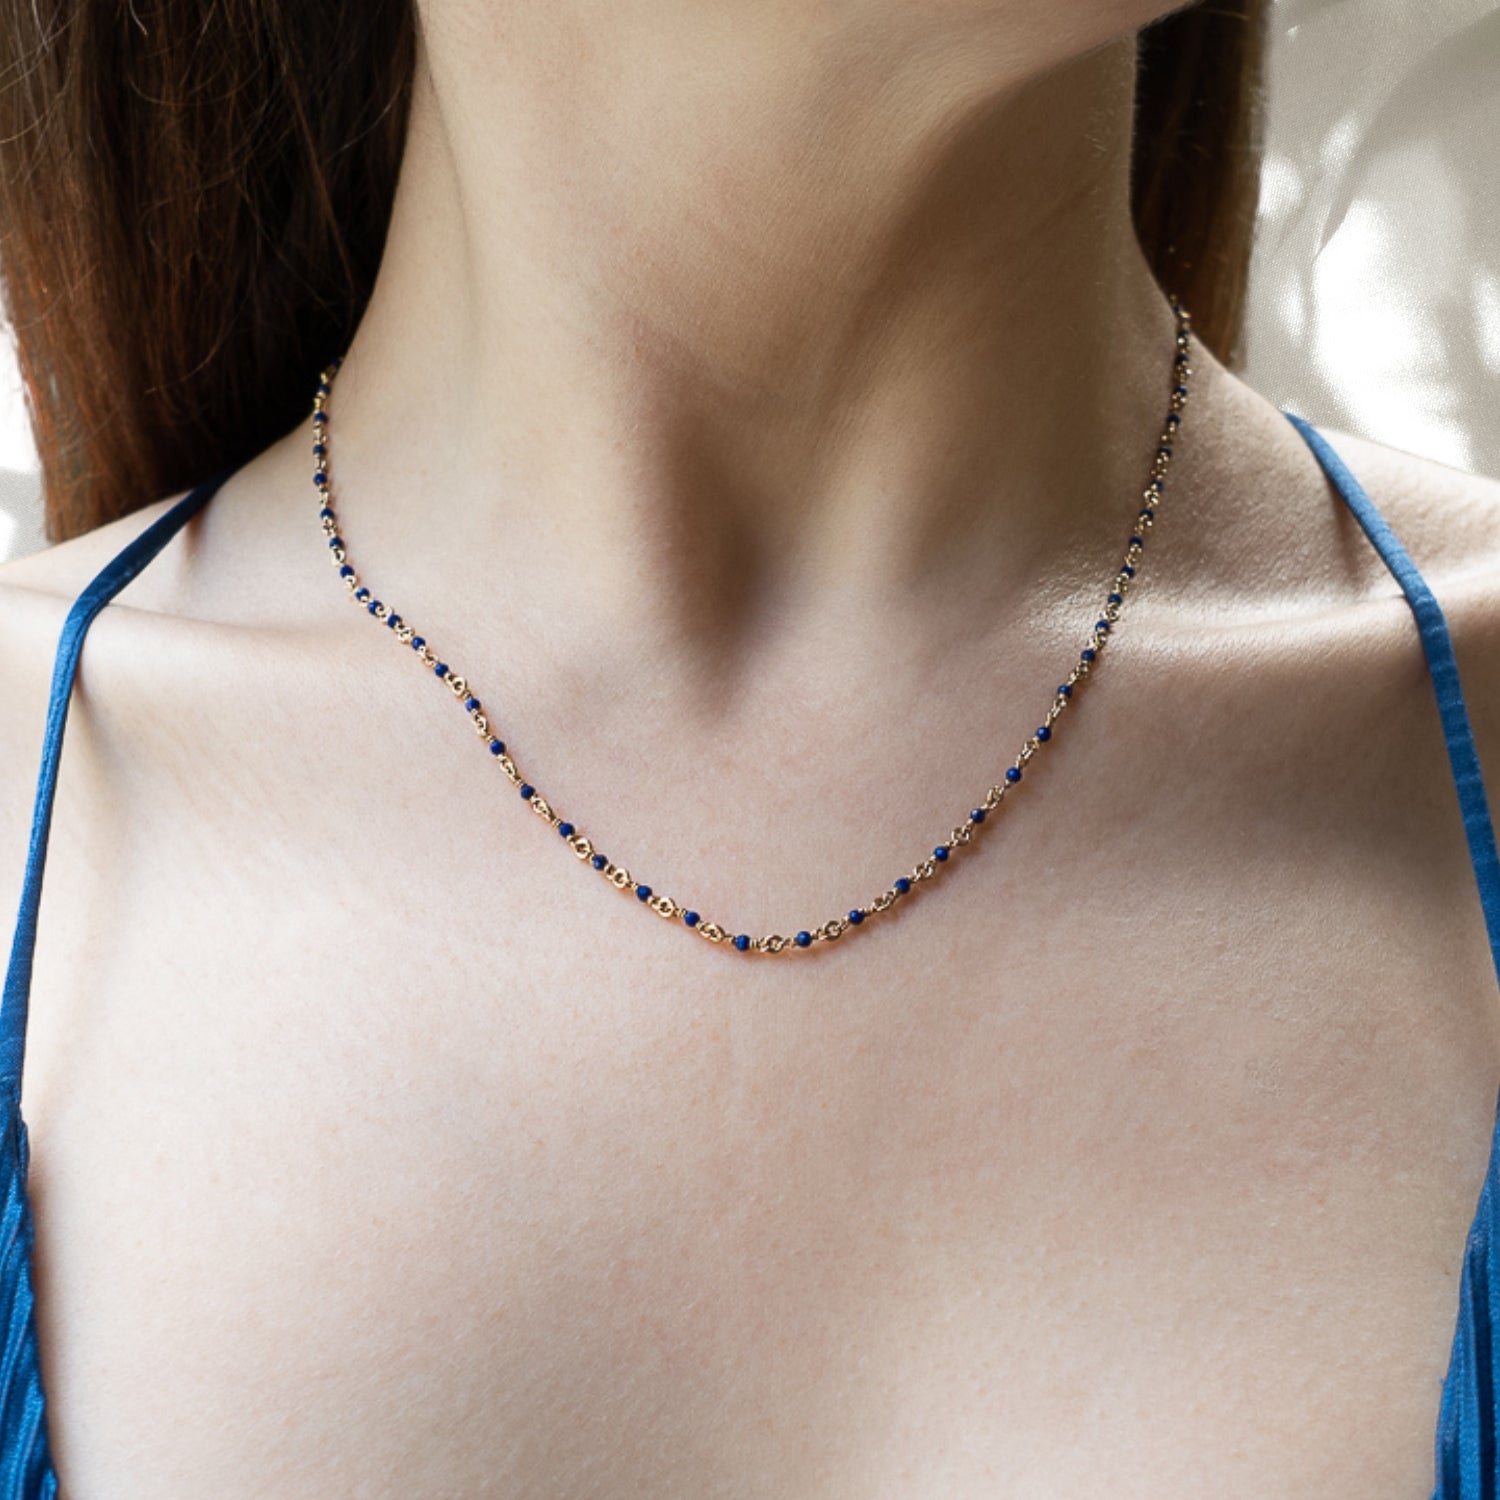 The Karya Lapis Gold Necklace gracefully adorns the neckline of the model, accentuating her natural beauty and adding a touch of elegance to her ensemble.